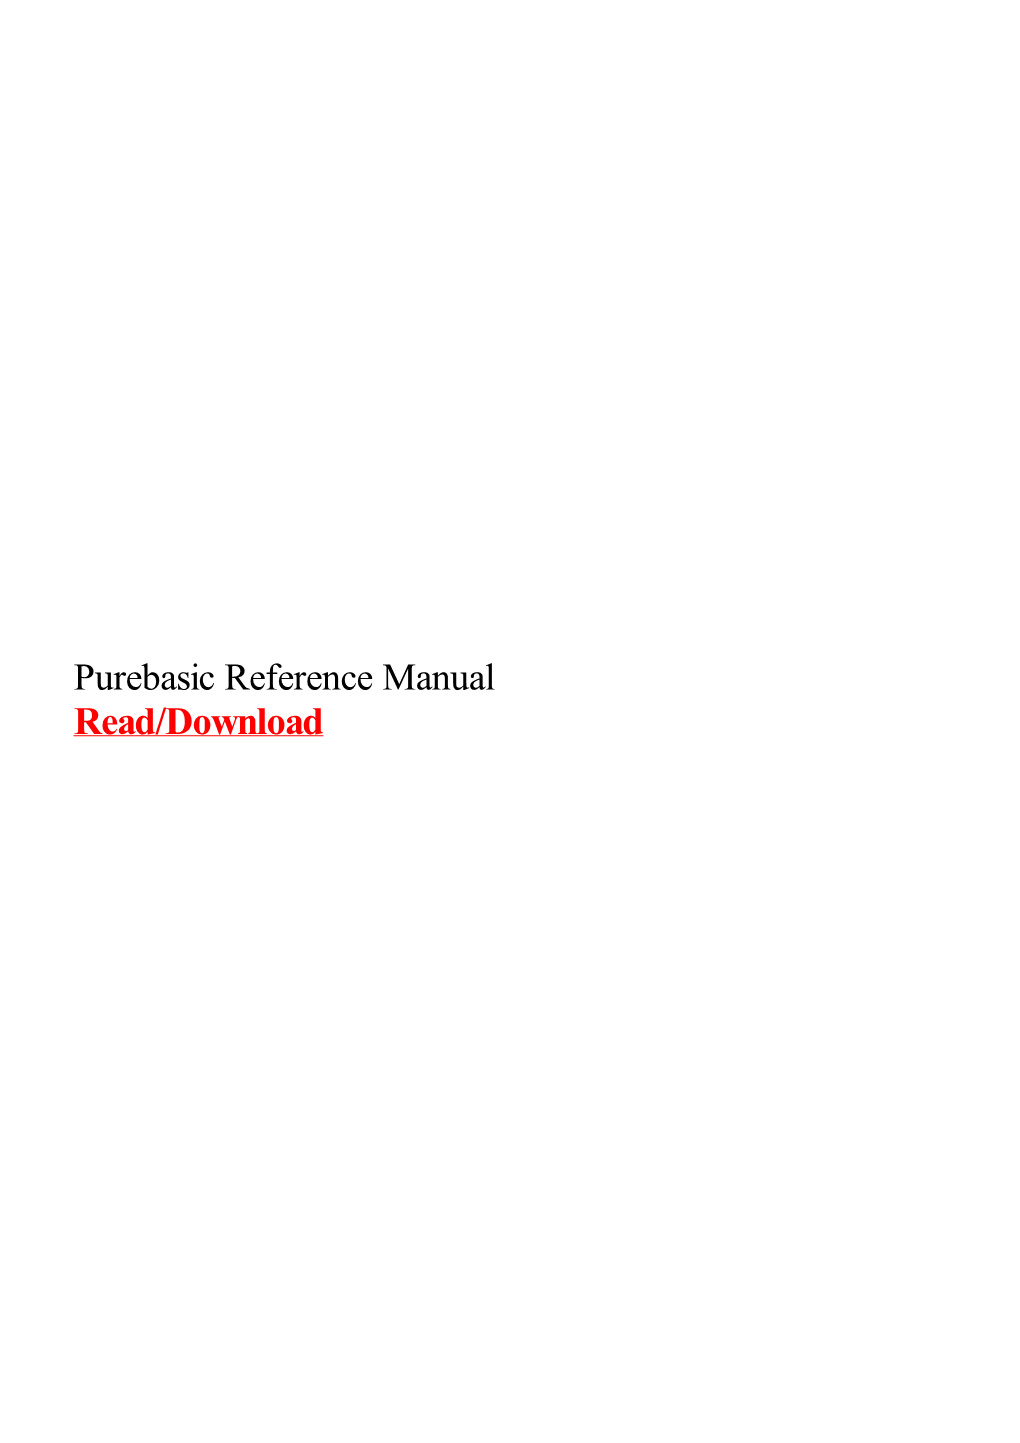 Purebasic Reference-Manual in PDF Small, Without Library